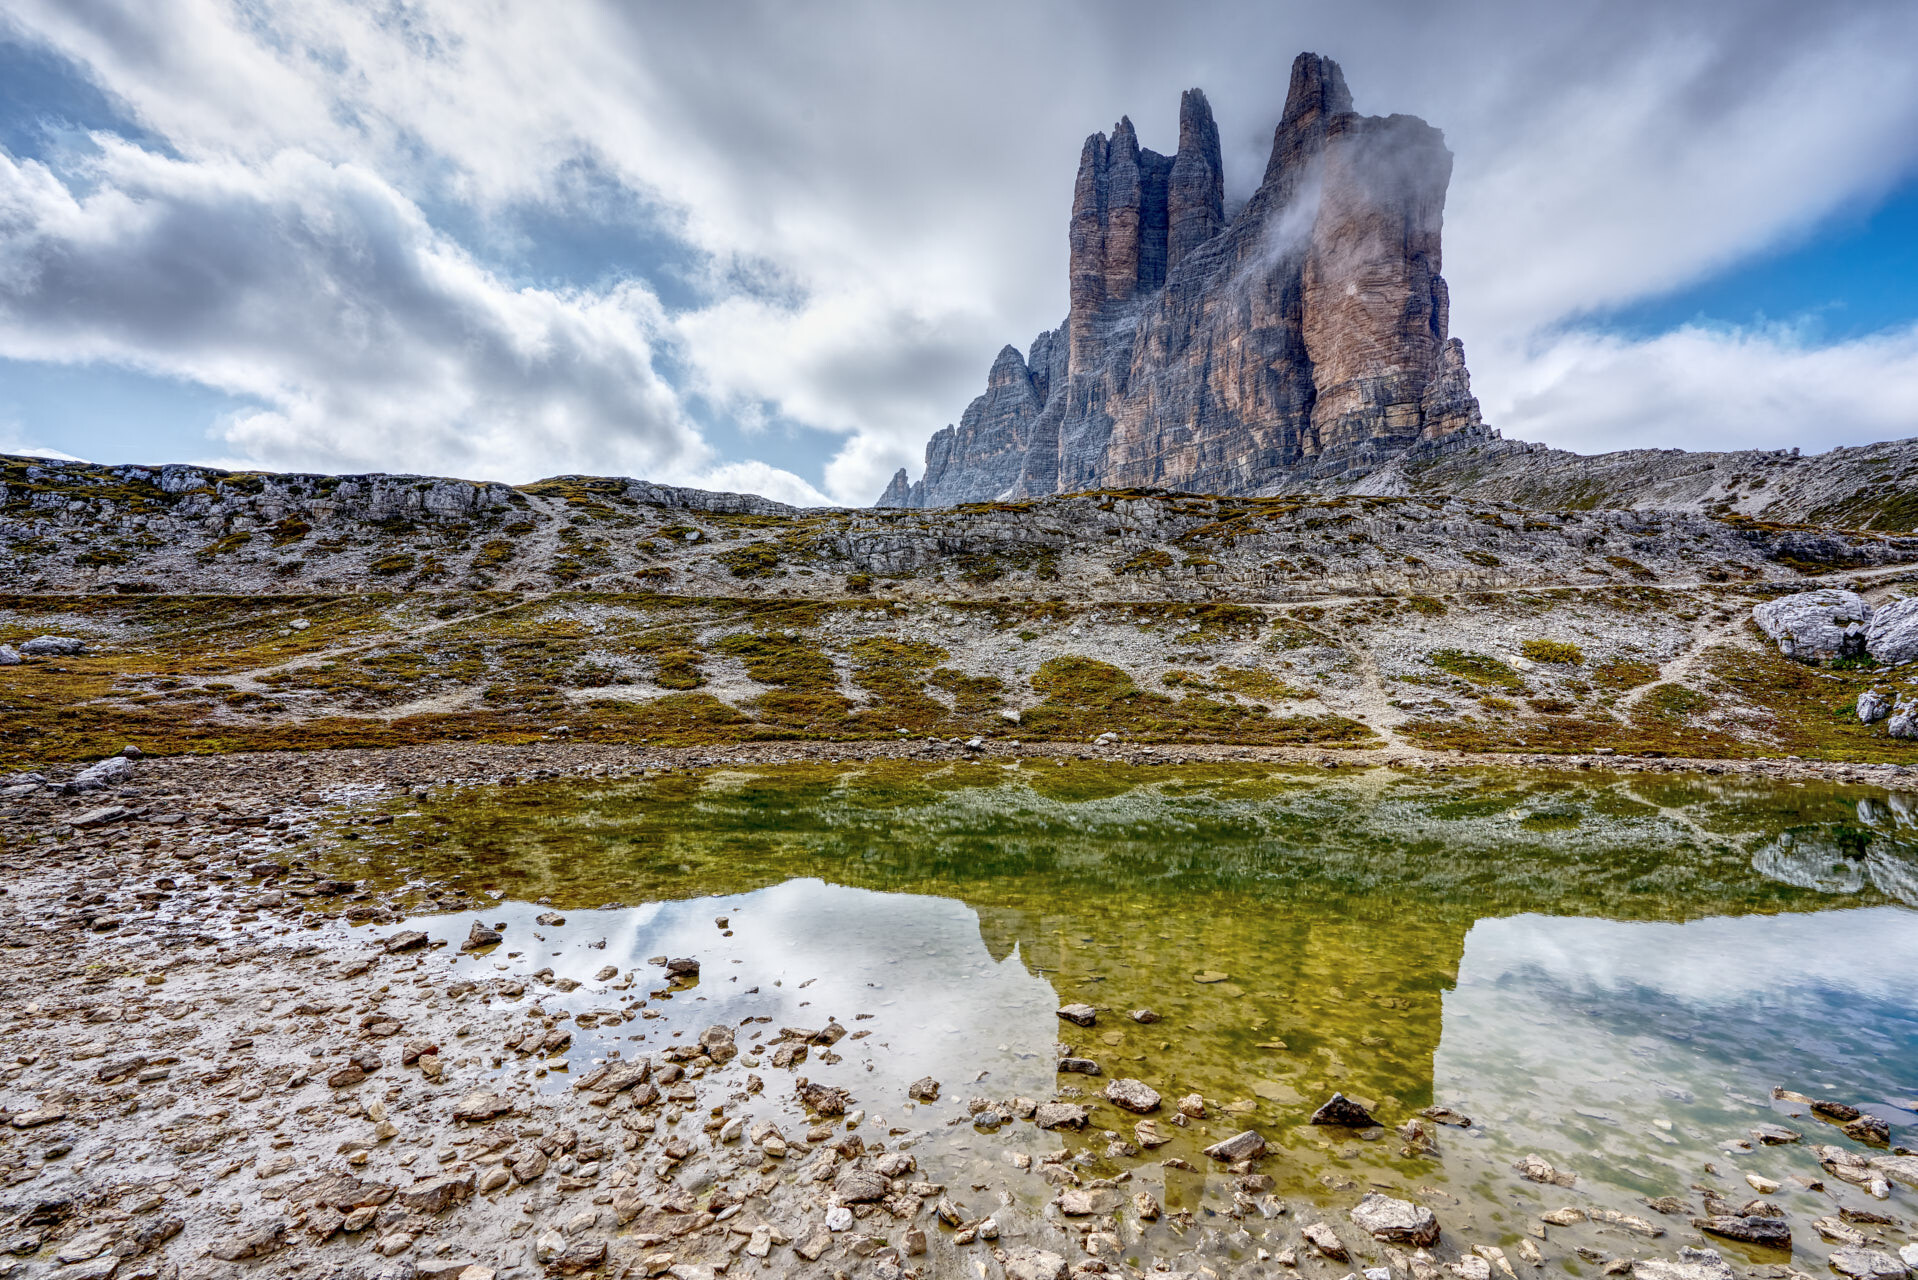 KESCHTNRIGGL, SO WHAT IS THAT? - SOUTH TYROL 2019 - Part 3: IMPRESSIONS FROM THE DOLOMITES